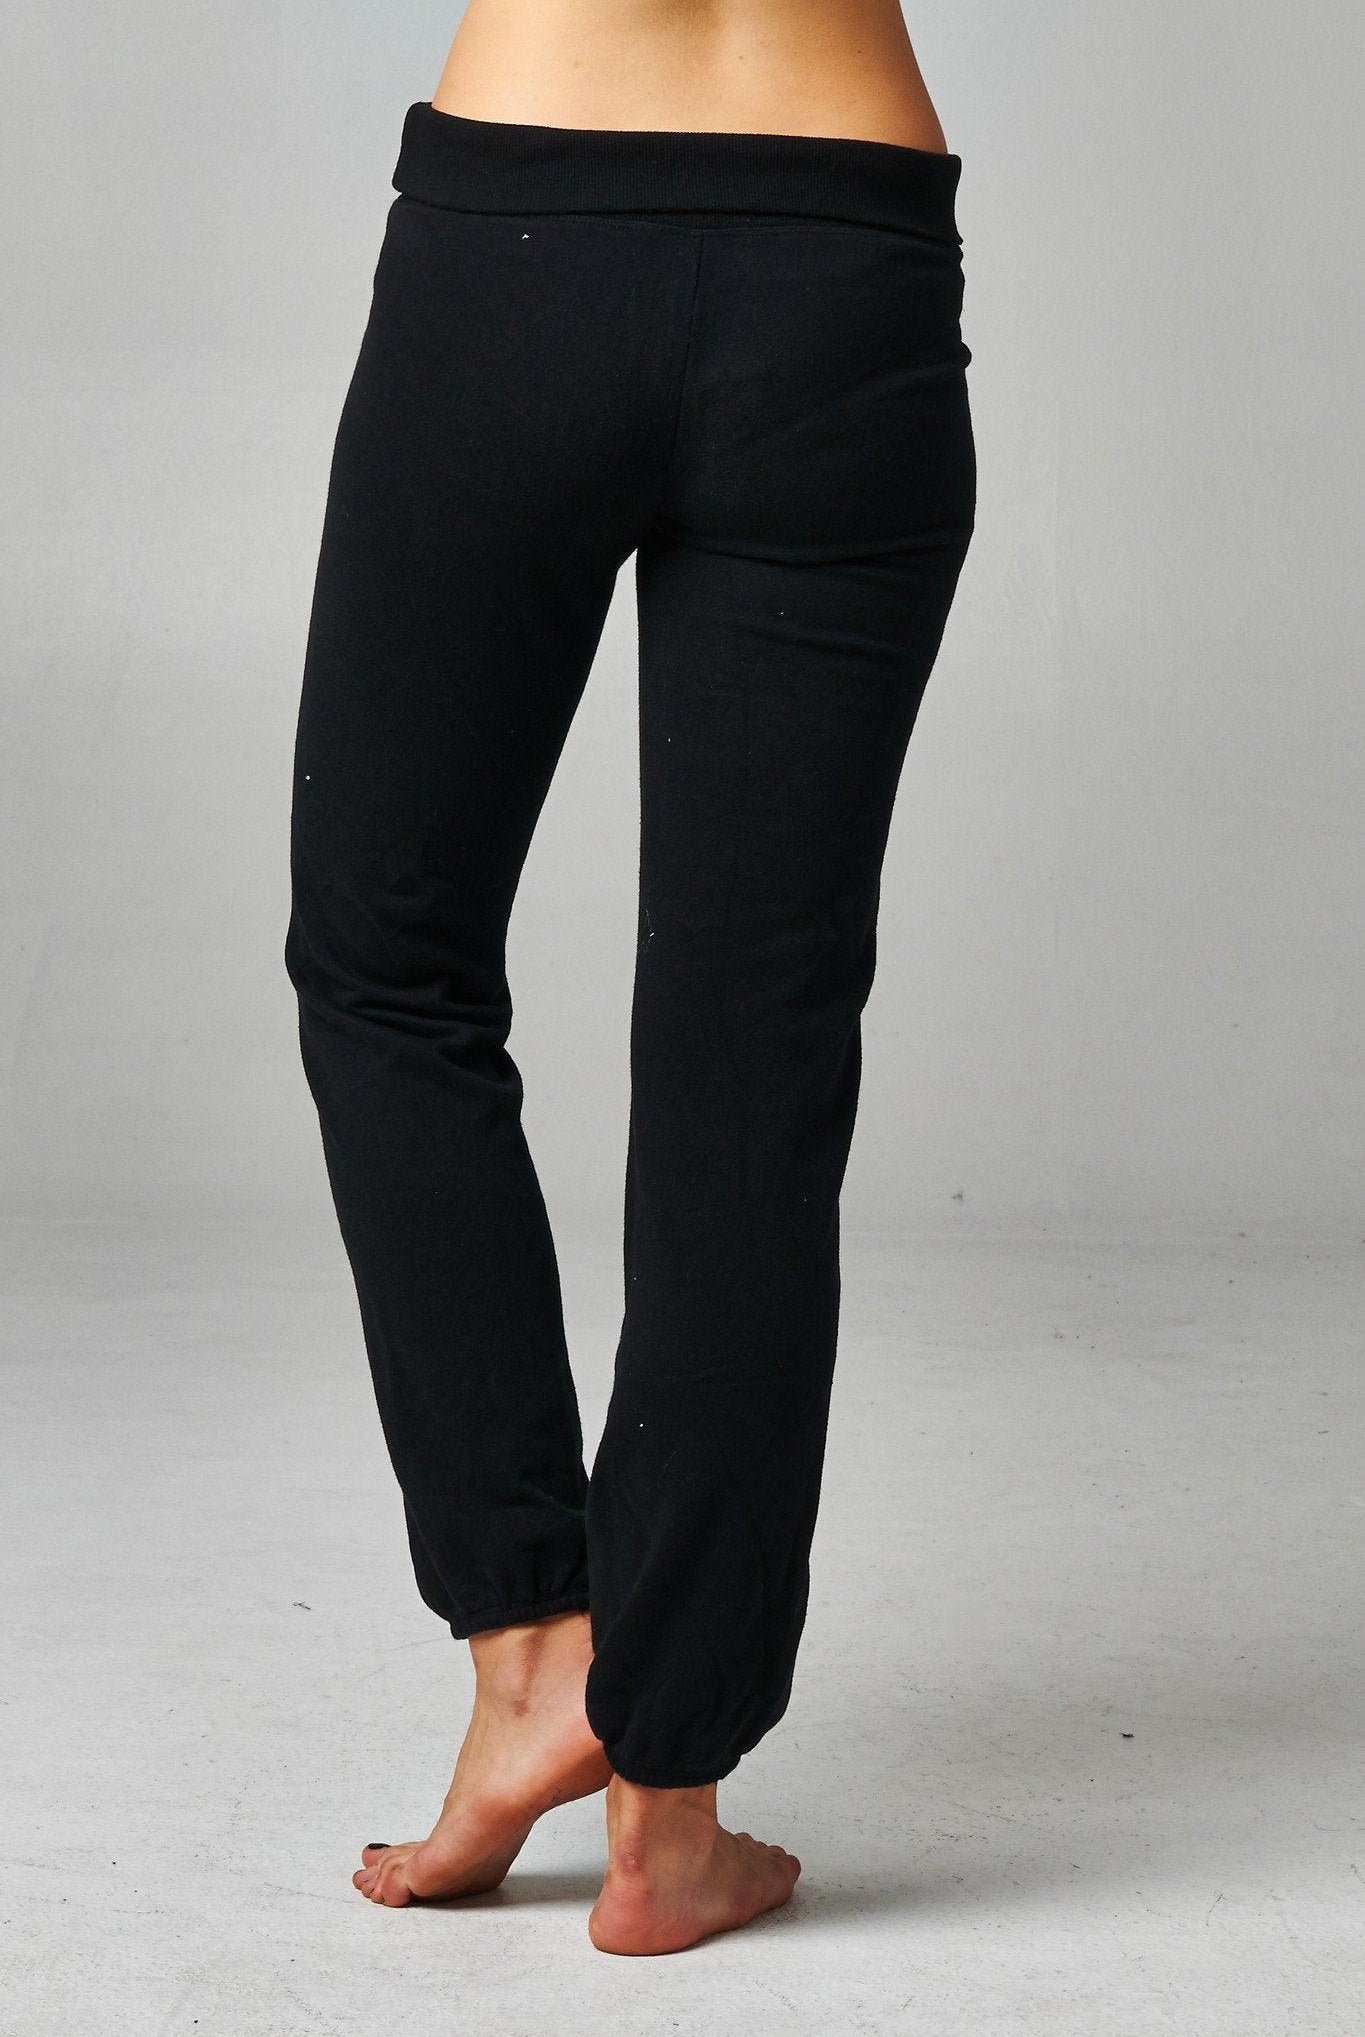 Women's Pants Women's Fold-over Waistband French Terry Screened Sweatpants